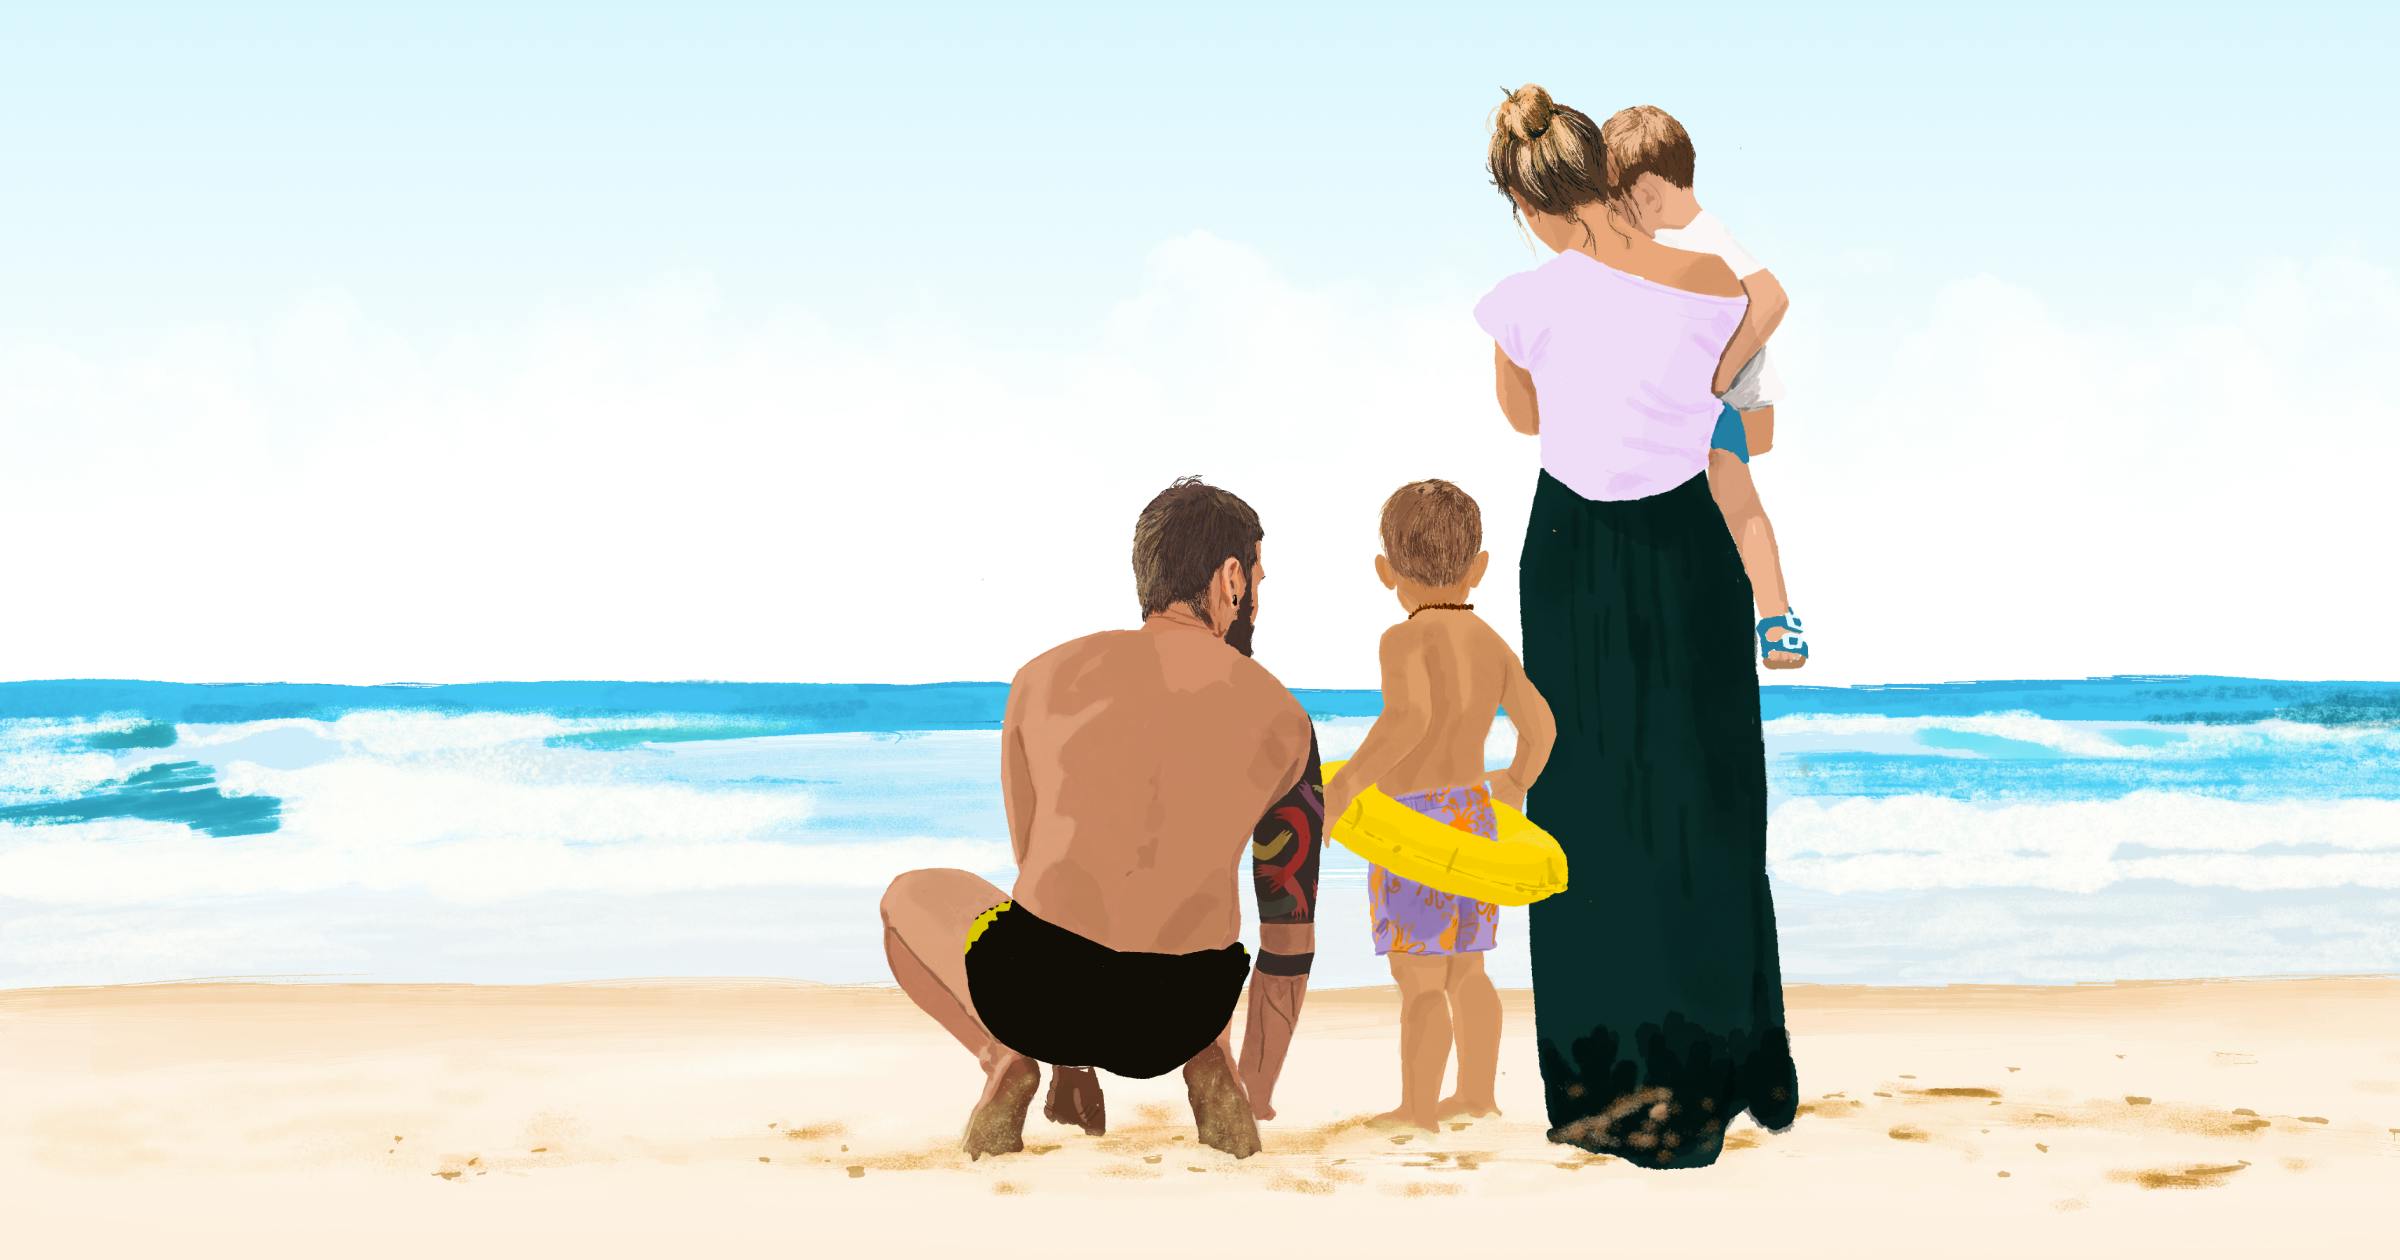 Illustration of a family with two small boys at the beach looking at the sea